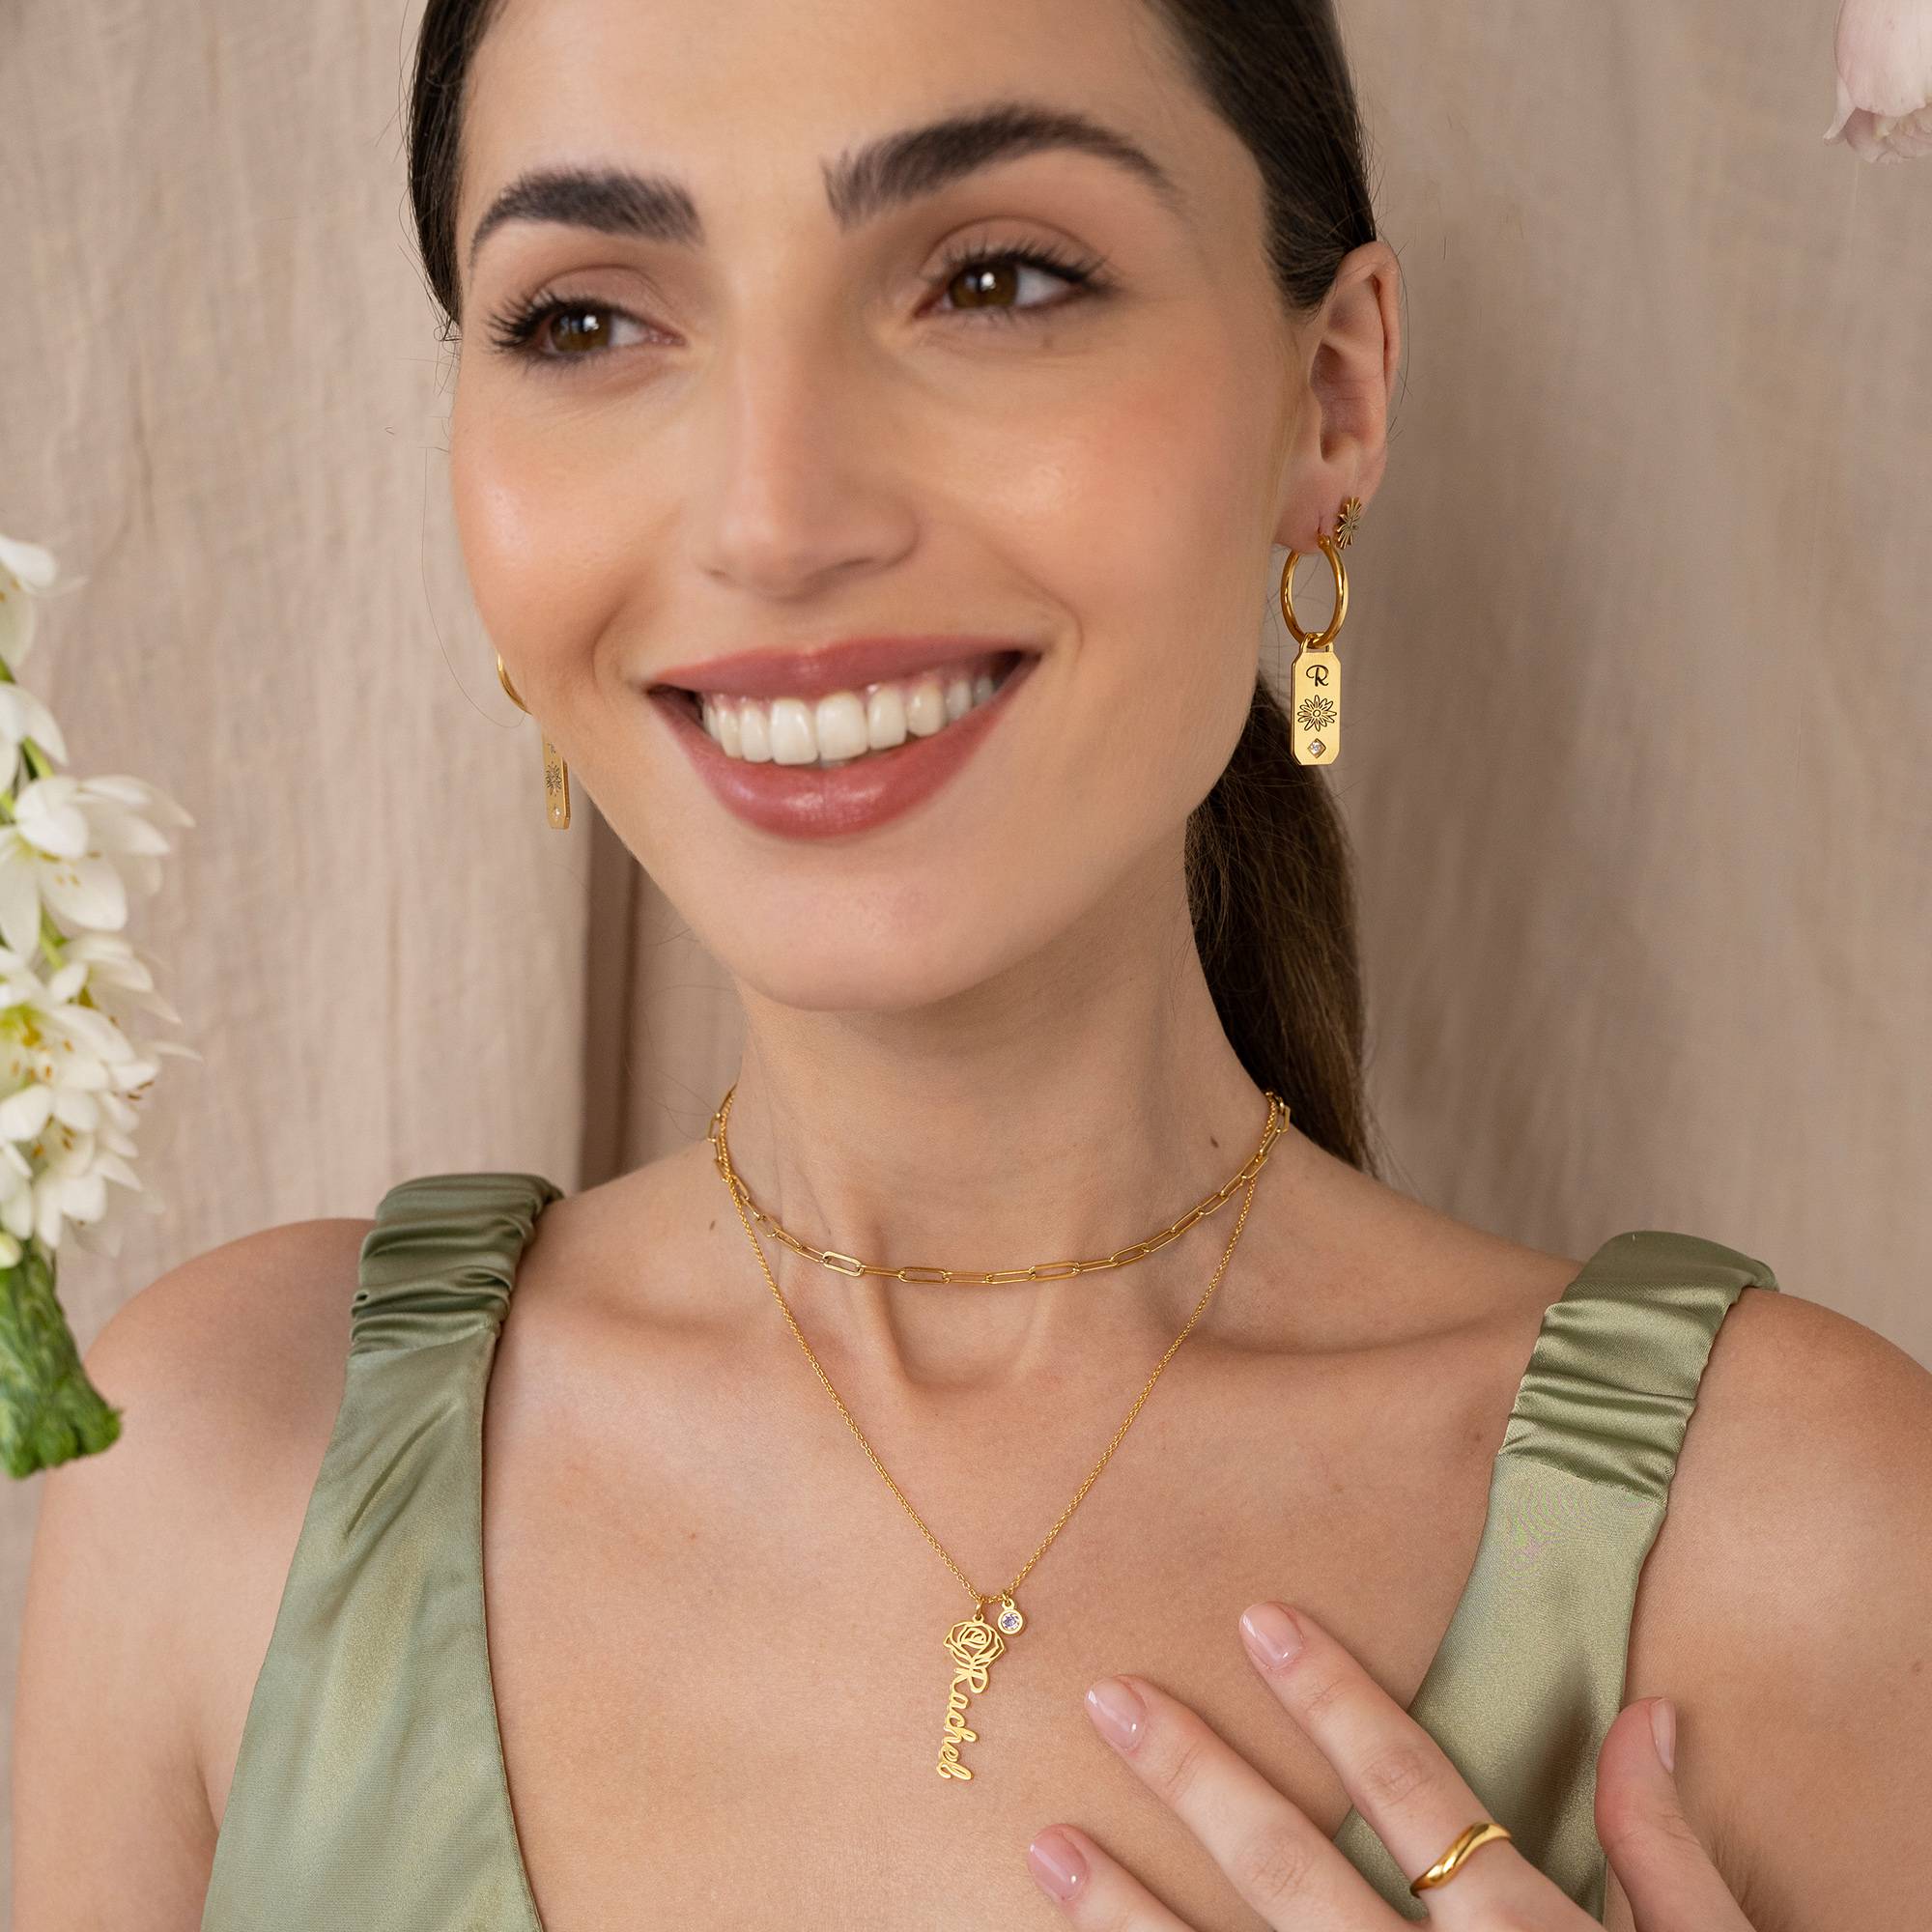 Blooming Birth Flower Name Necklace with Birthstone in 18K Gold Plating-2 product photo